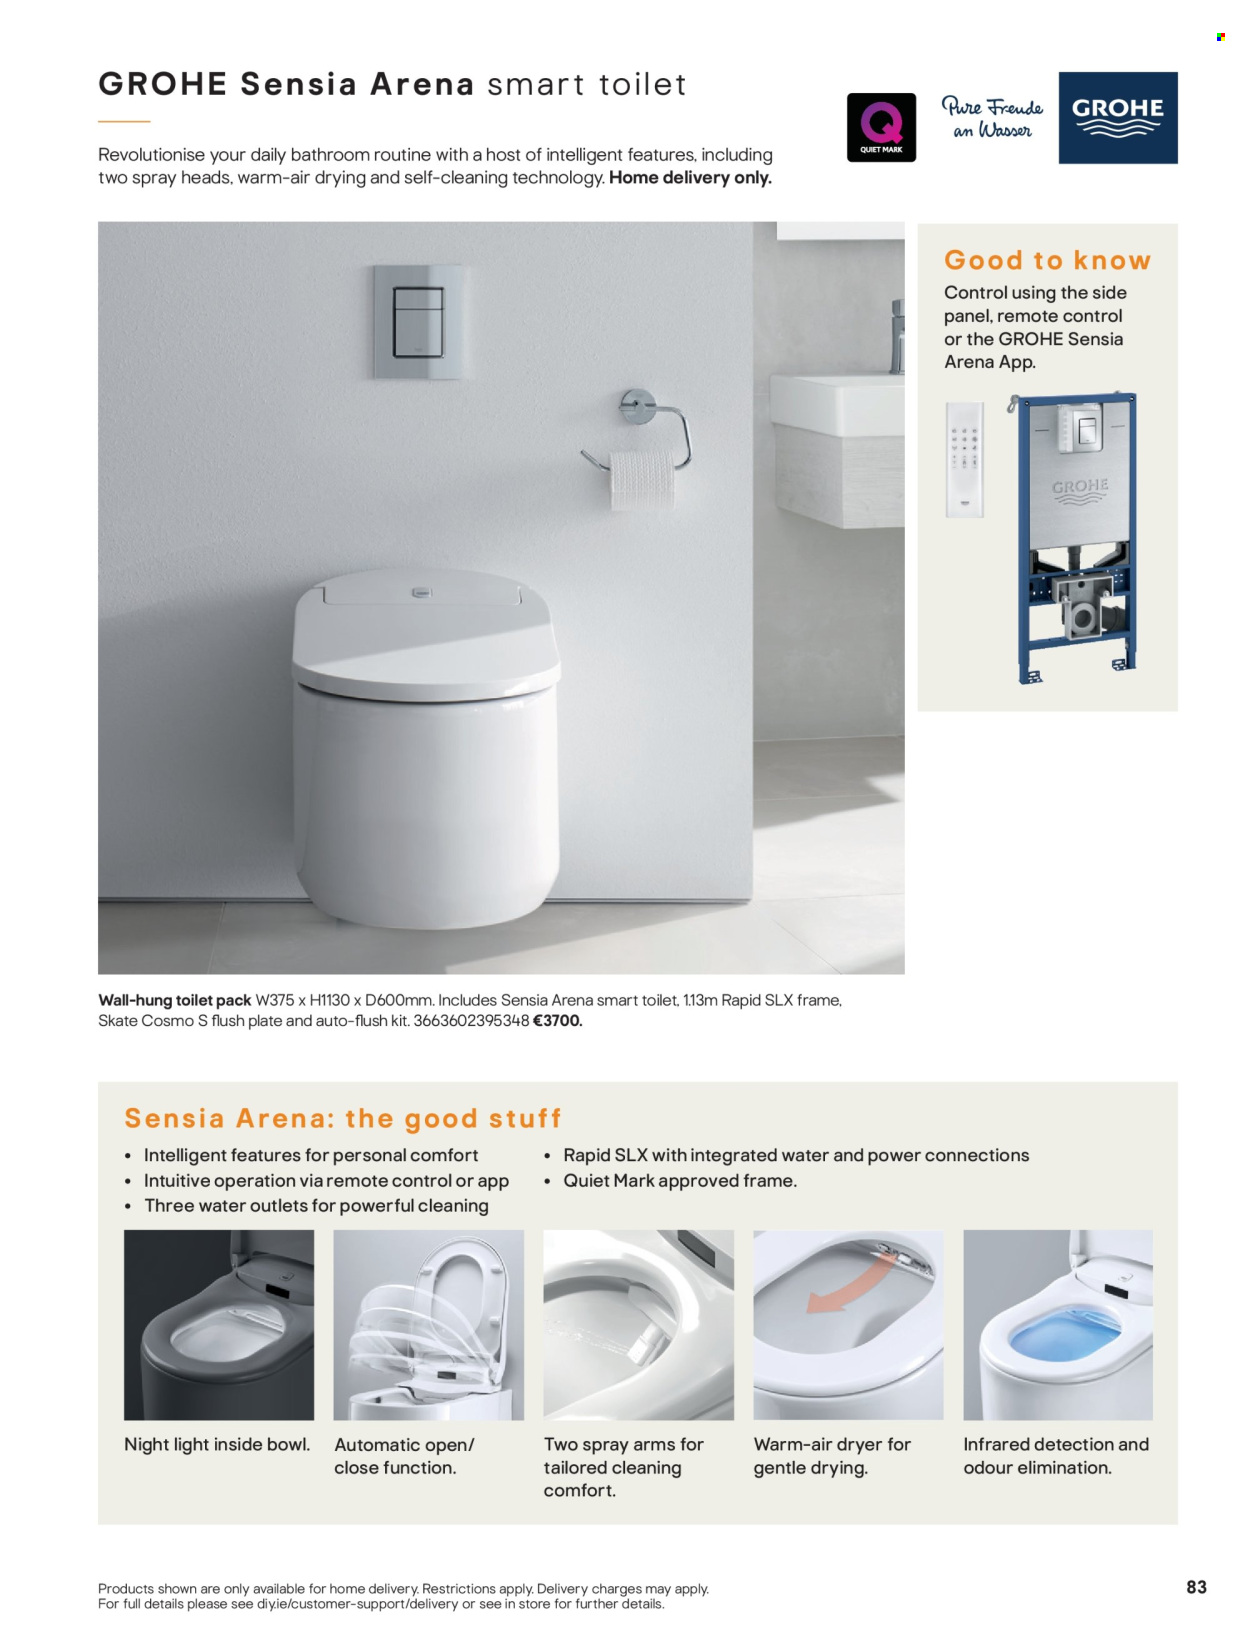 thumbnail - B&Q offer  - Sales products - Grohe, toilet. Page 83.